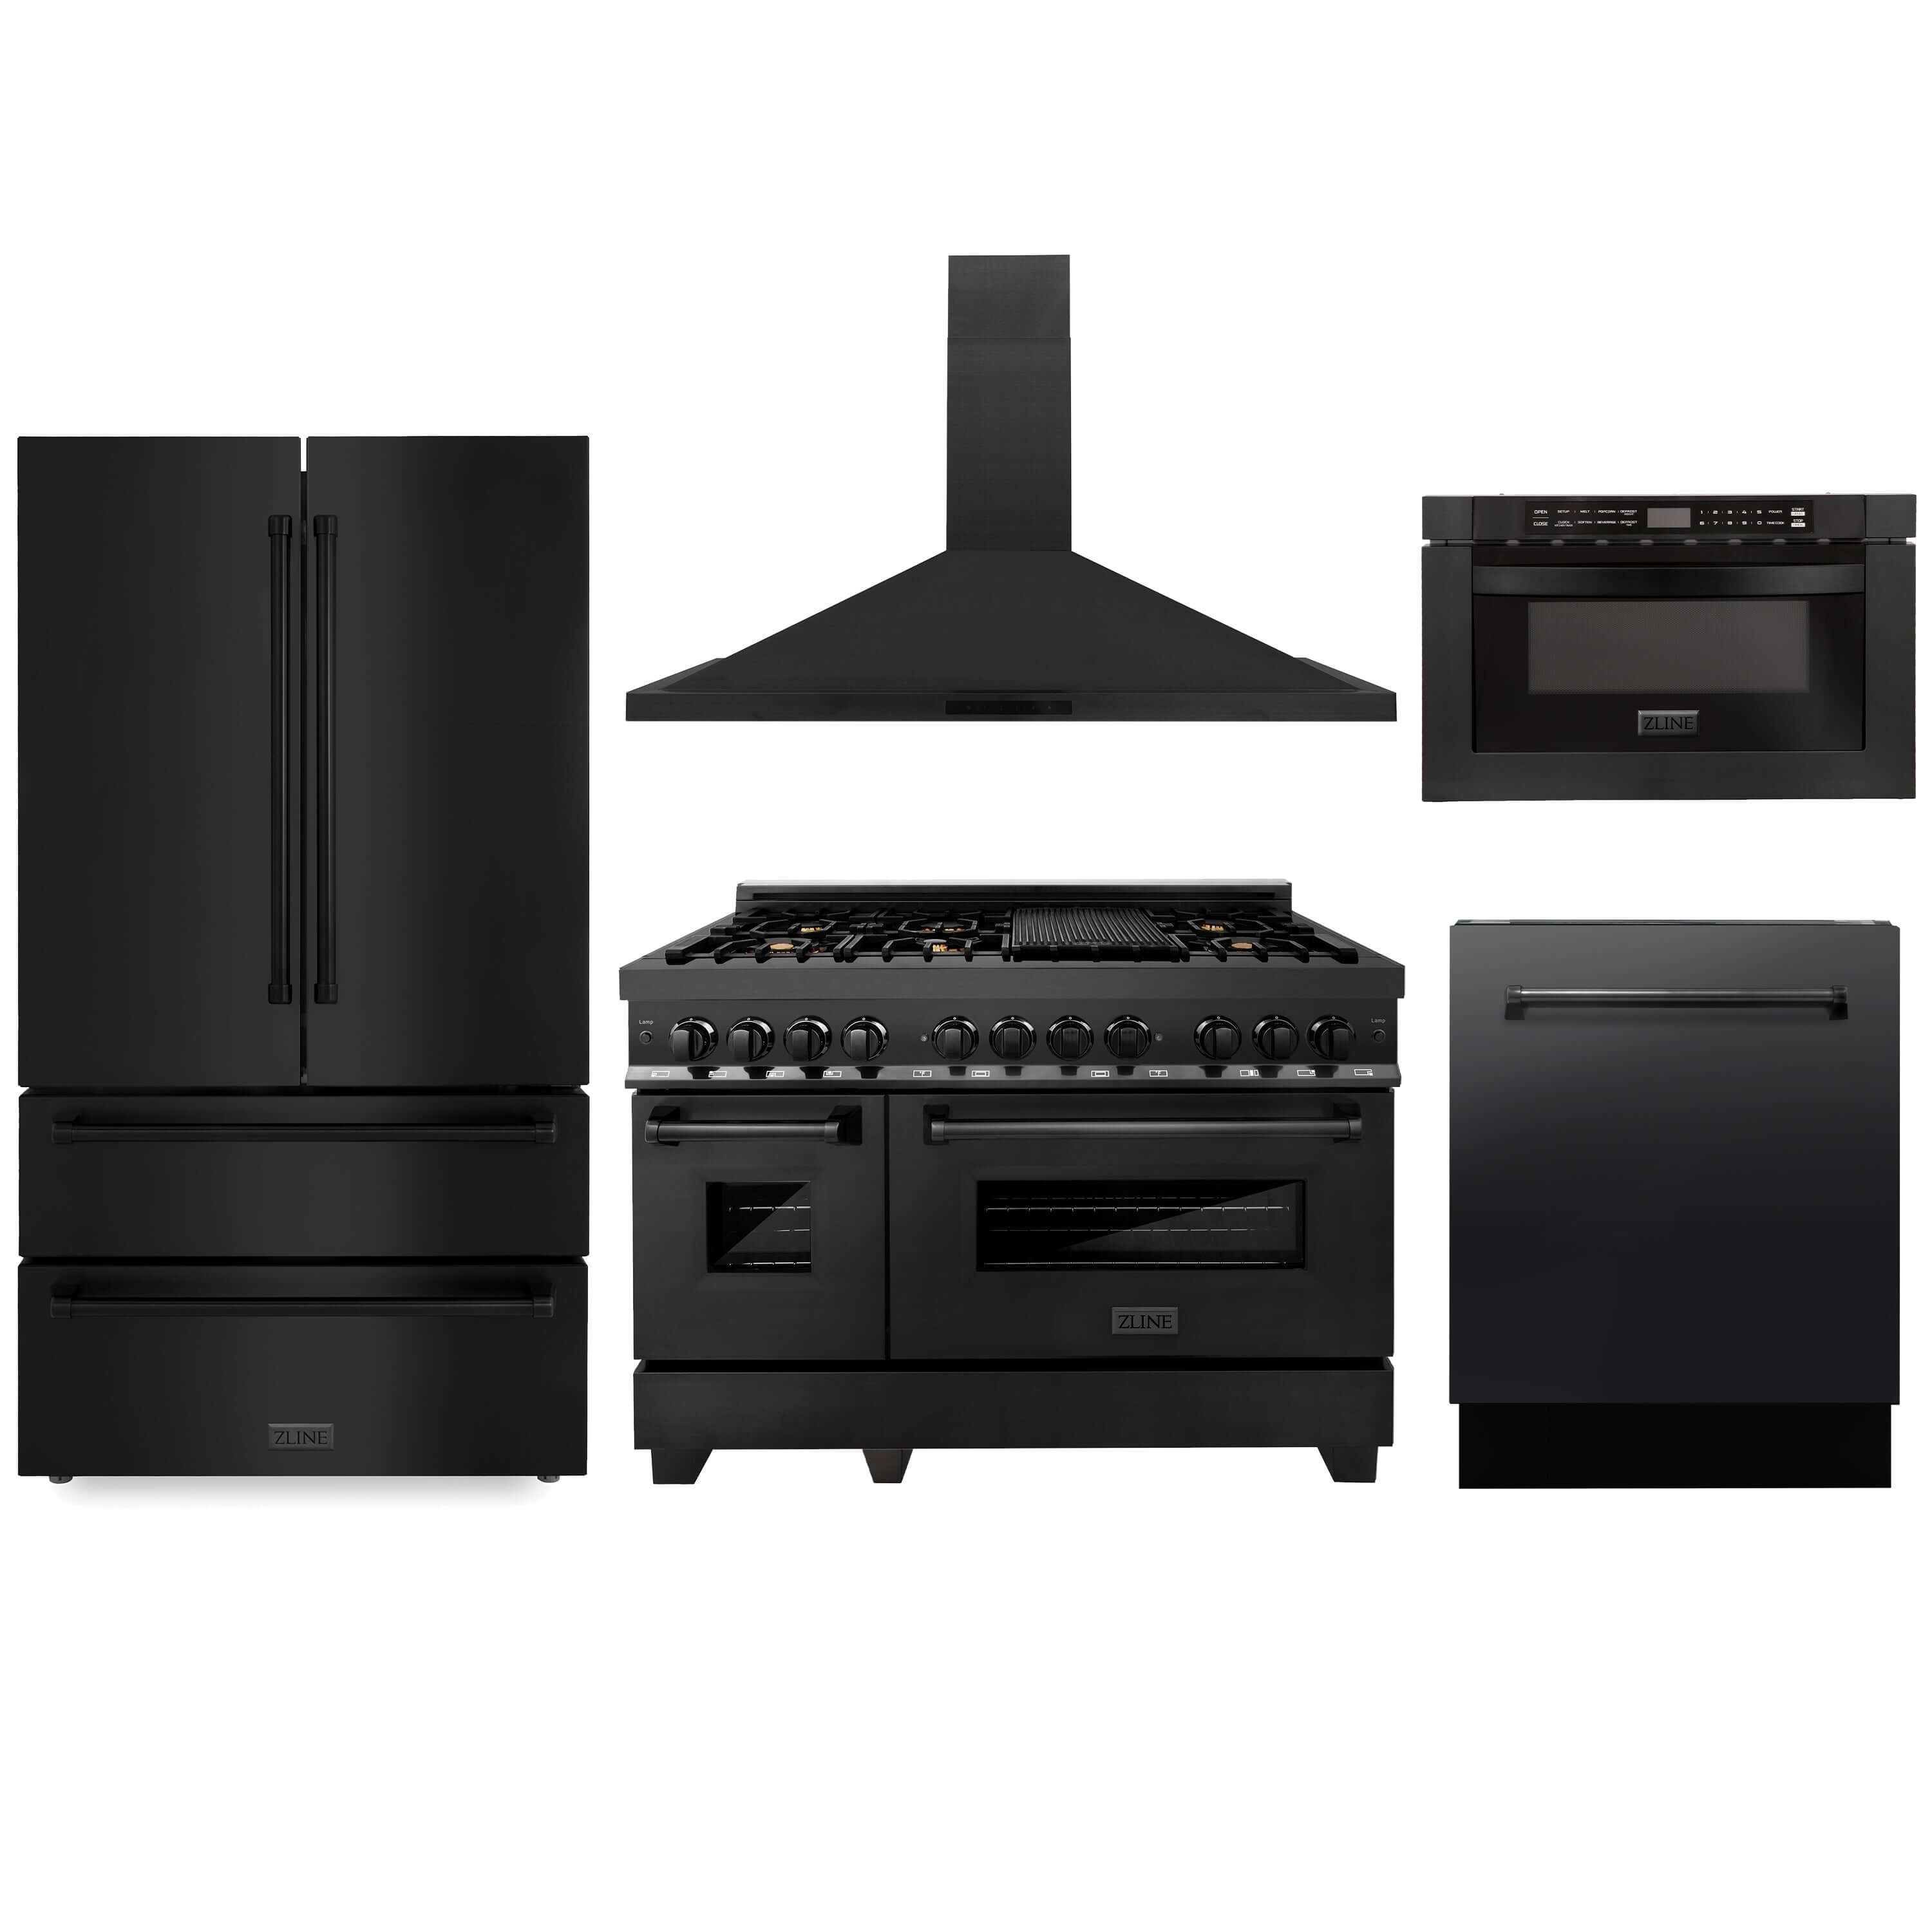 ZLINE Kitchen Package with Black Stainless Steel Refrigeration, 48 in. Dual Fuel Range in Black Stainless Steel with Brass Burners, 48 in. Black Stainless Steel Range Hood, Microwave Drawer in Black Stainless Steel, and 24 in. Tall Tub Dishwasher with Black Stainless Steel Panel(5KPR-RABRH48-MWDWV)